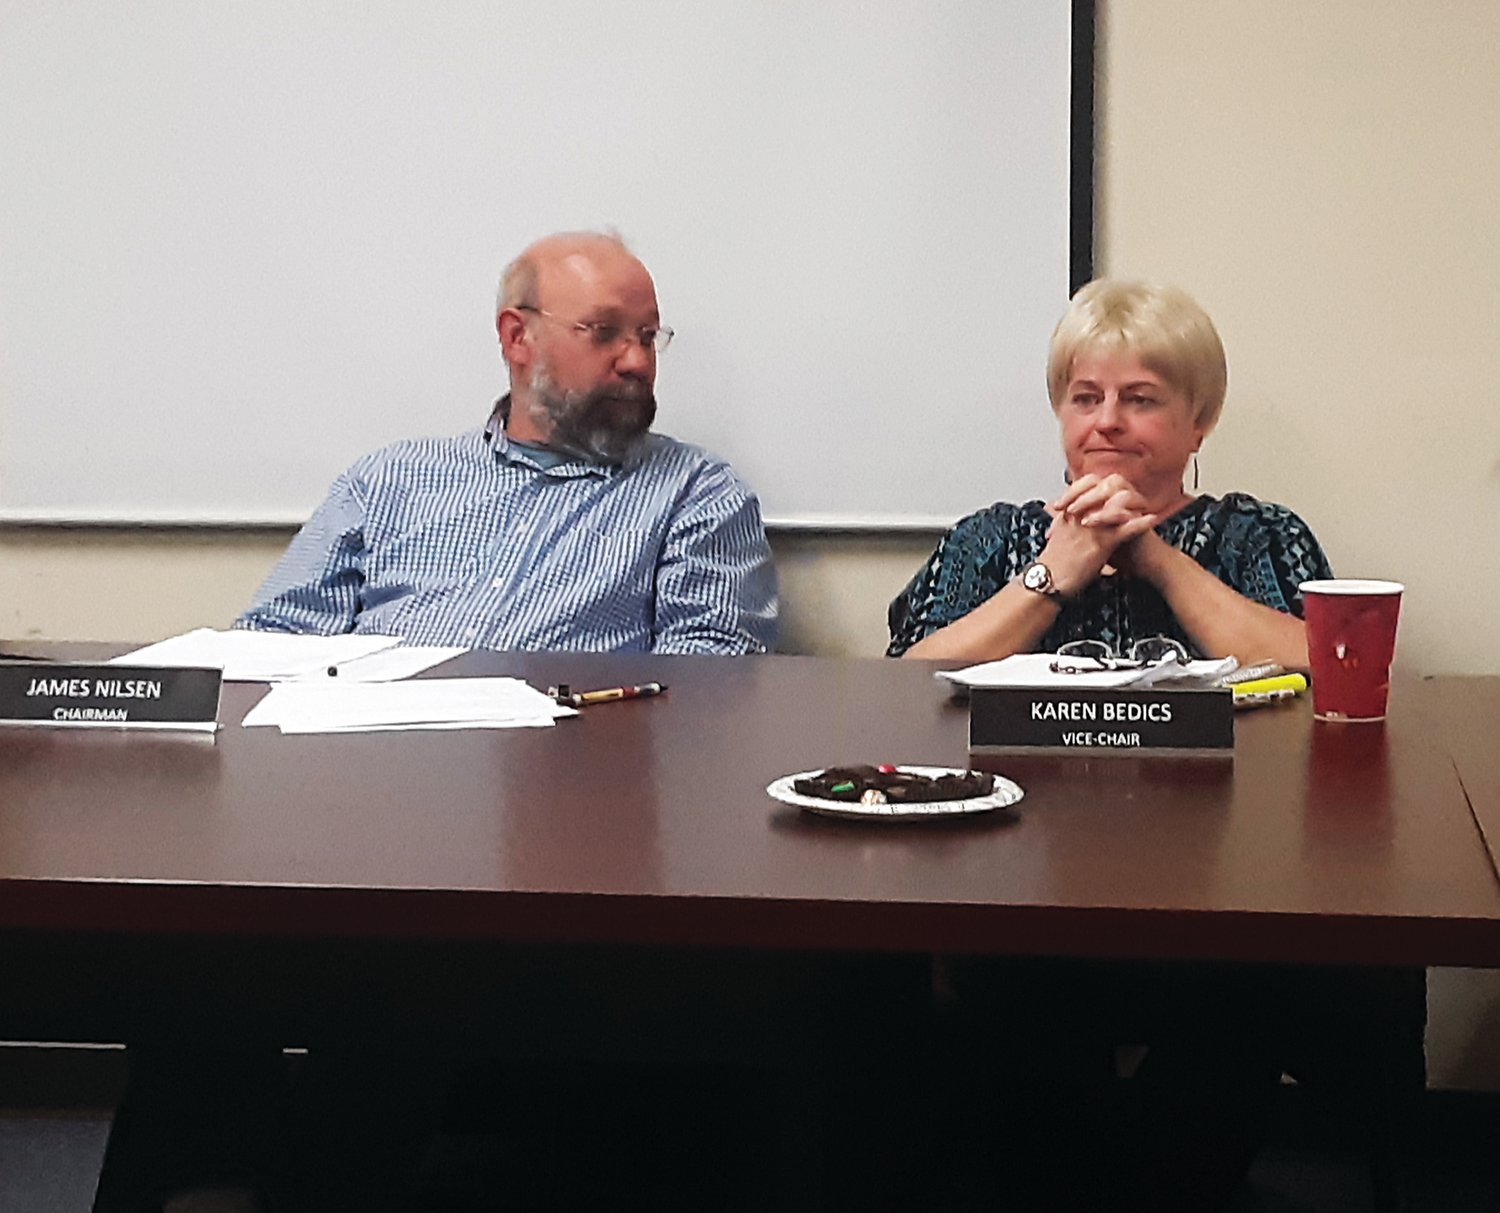 Acting Supervisor Chairman Jim Nilsen said he looked forward to working with Supervisor Karen Bedics on the Springfield Planning Commission. Photograph by Barrie-John Murphy.